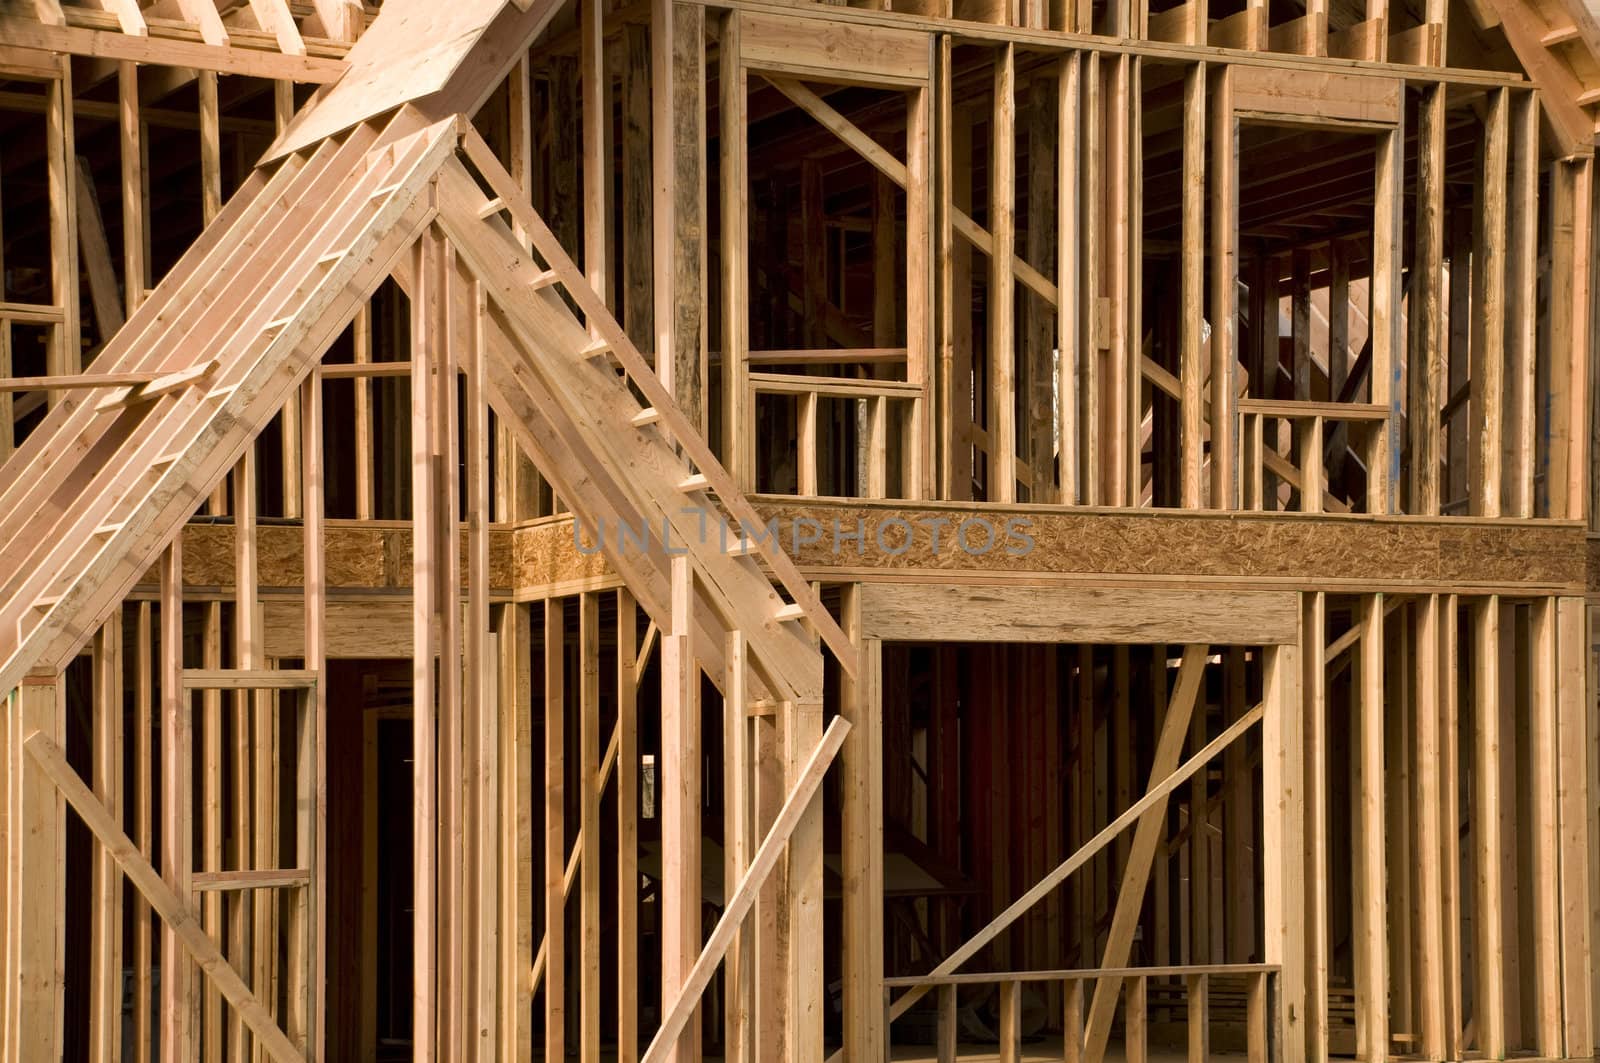 Section of a house in the framing phase of construction